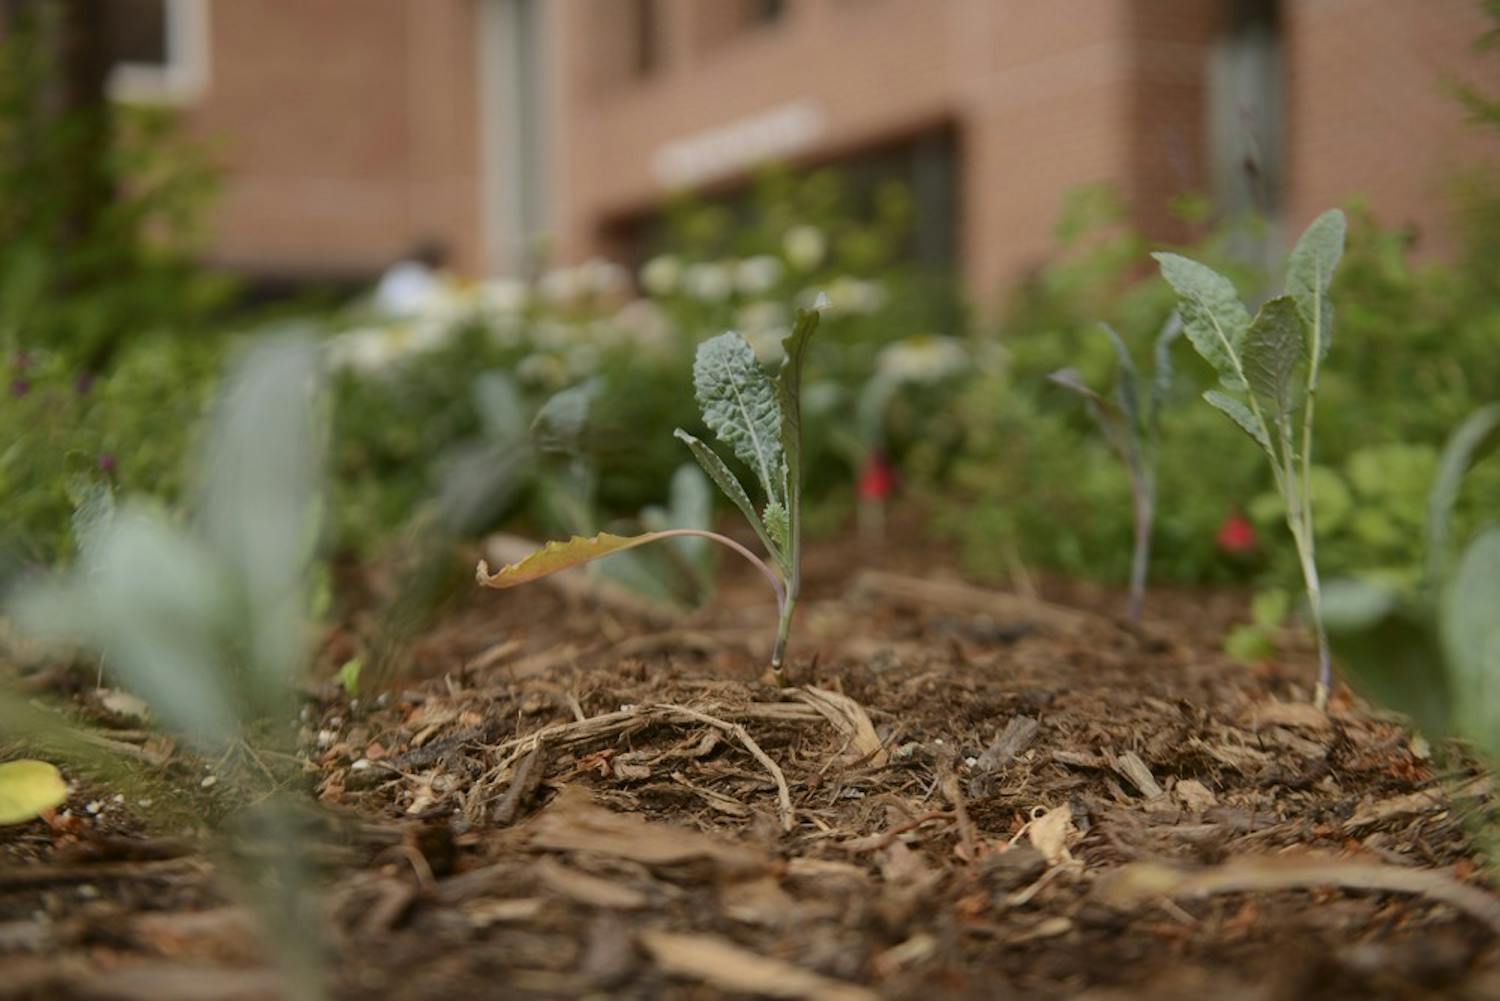 The Edible Campus new garden planting and celebration will take place this Saturday as part of the Earth Week festivities. 